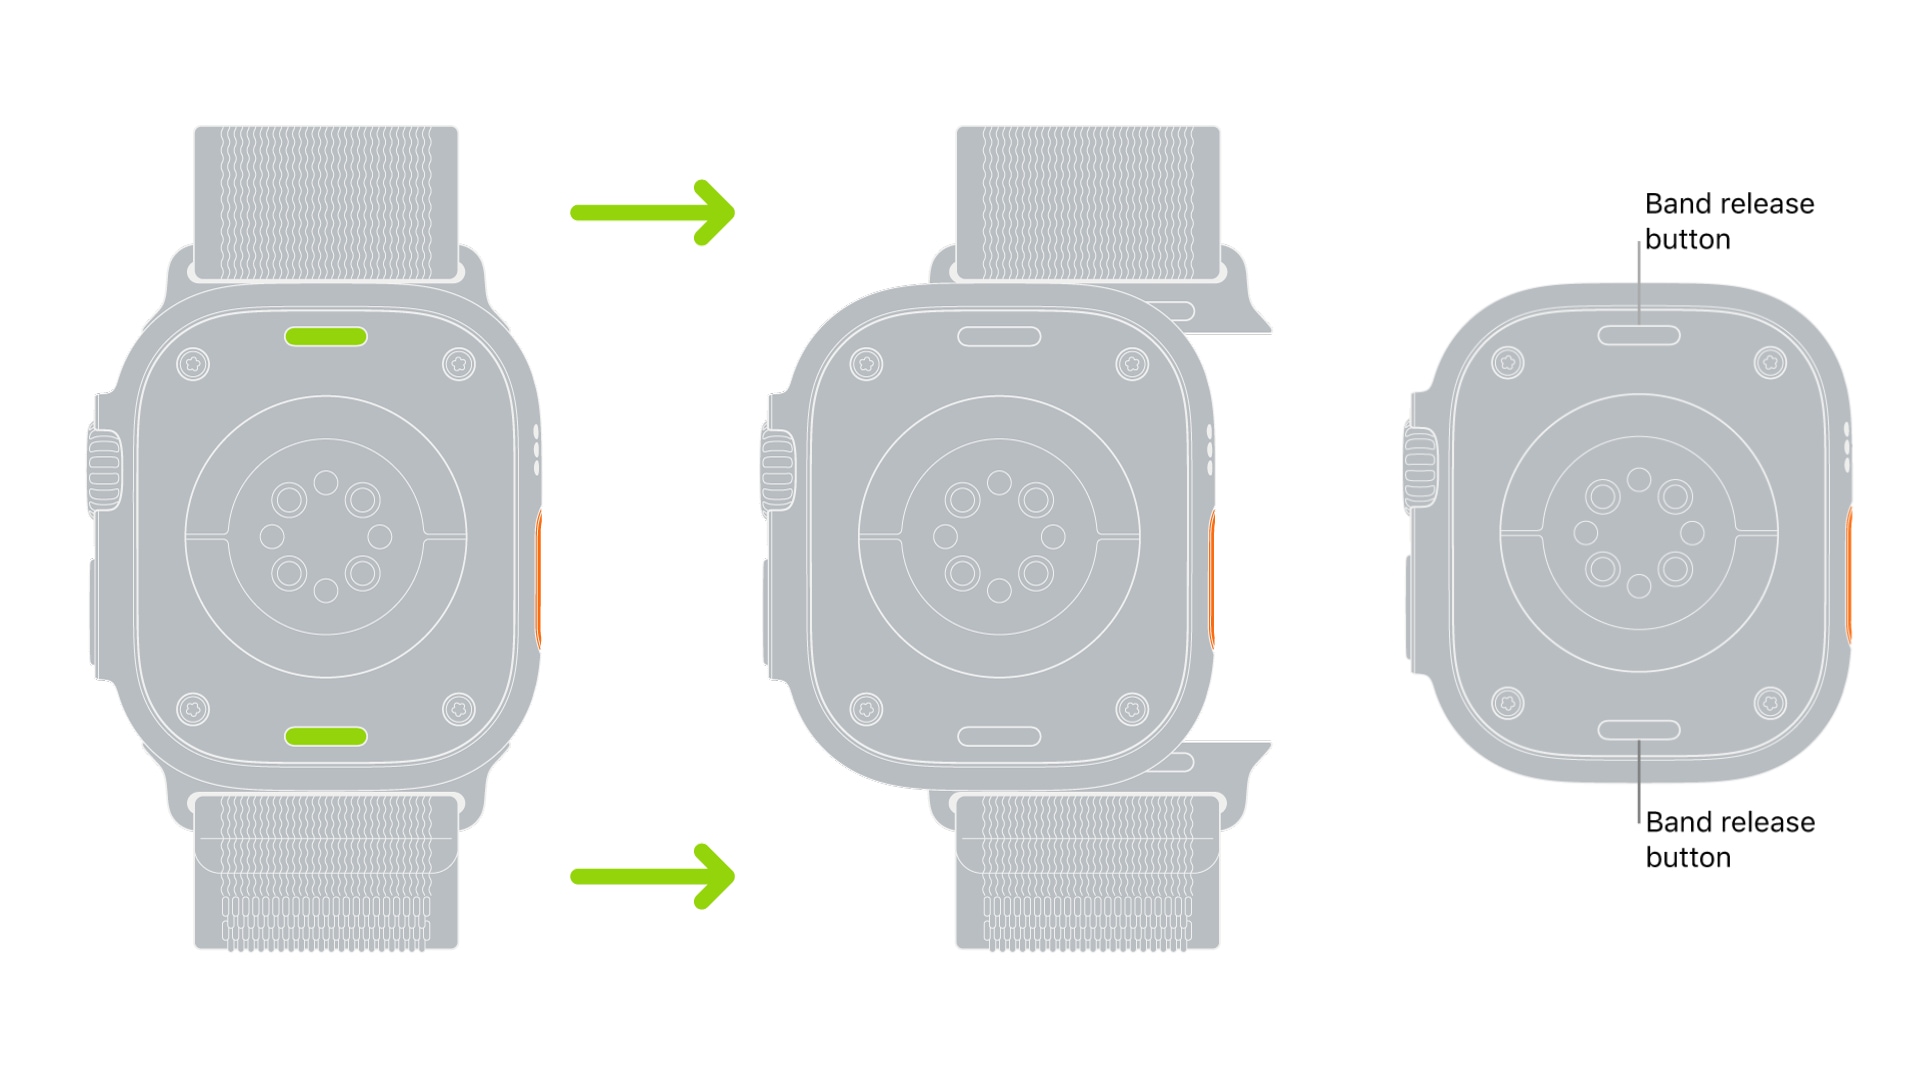 Inside the Apple Watch’s seamless band release mechanism